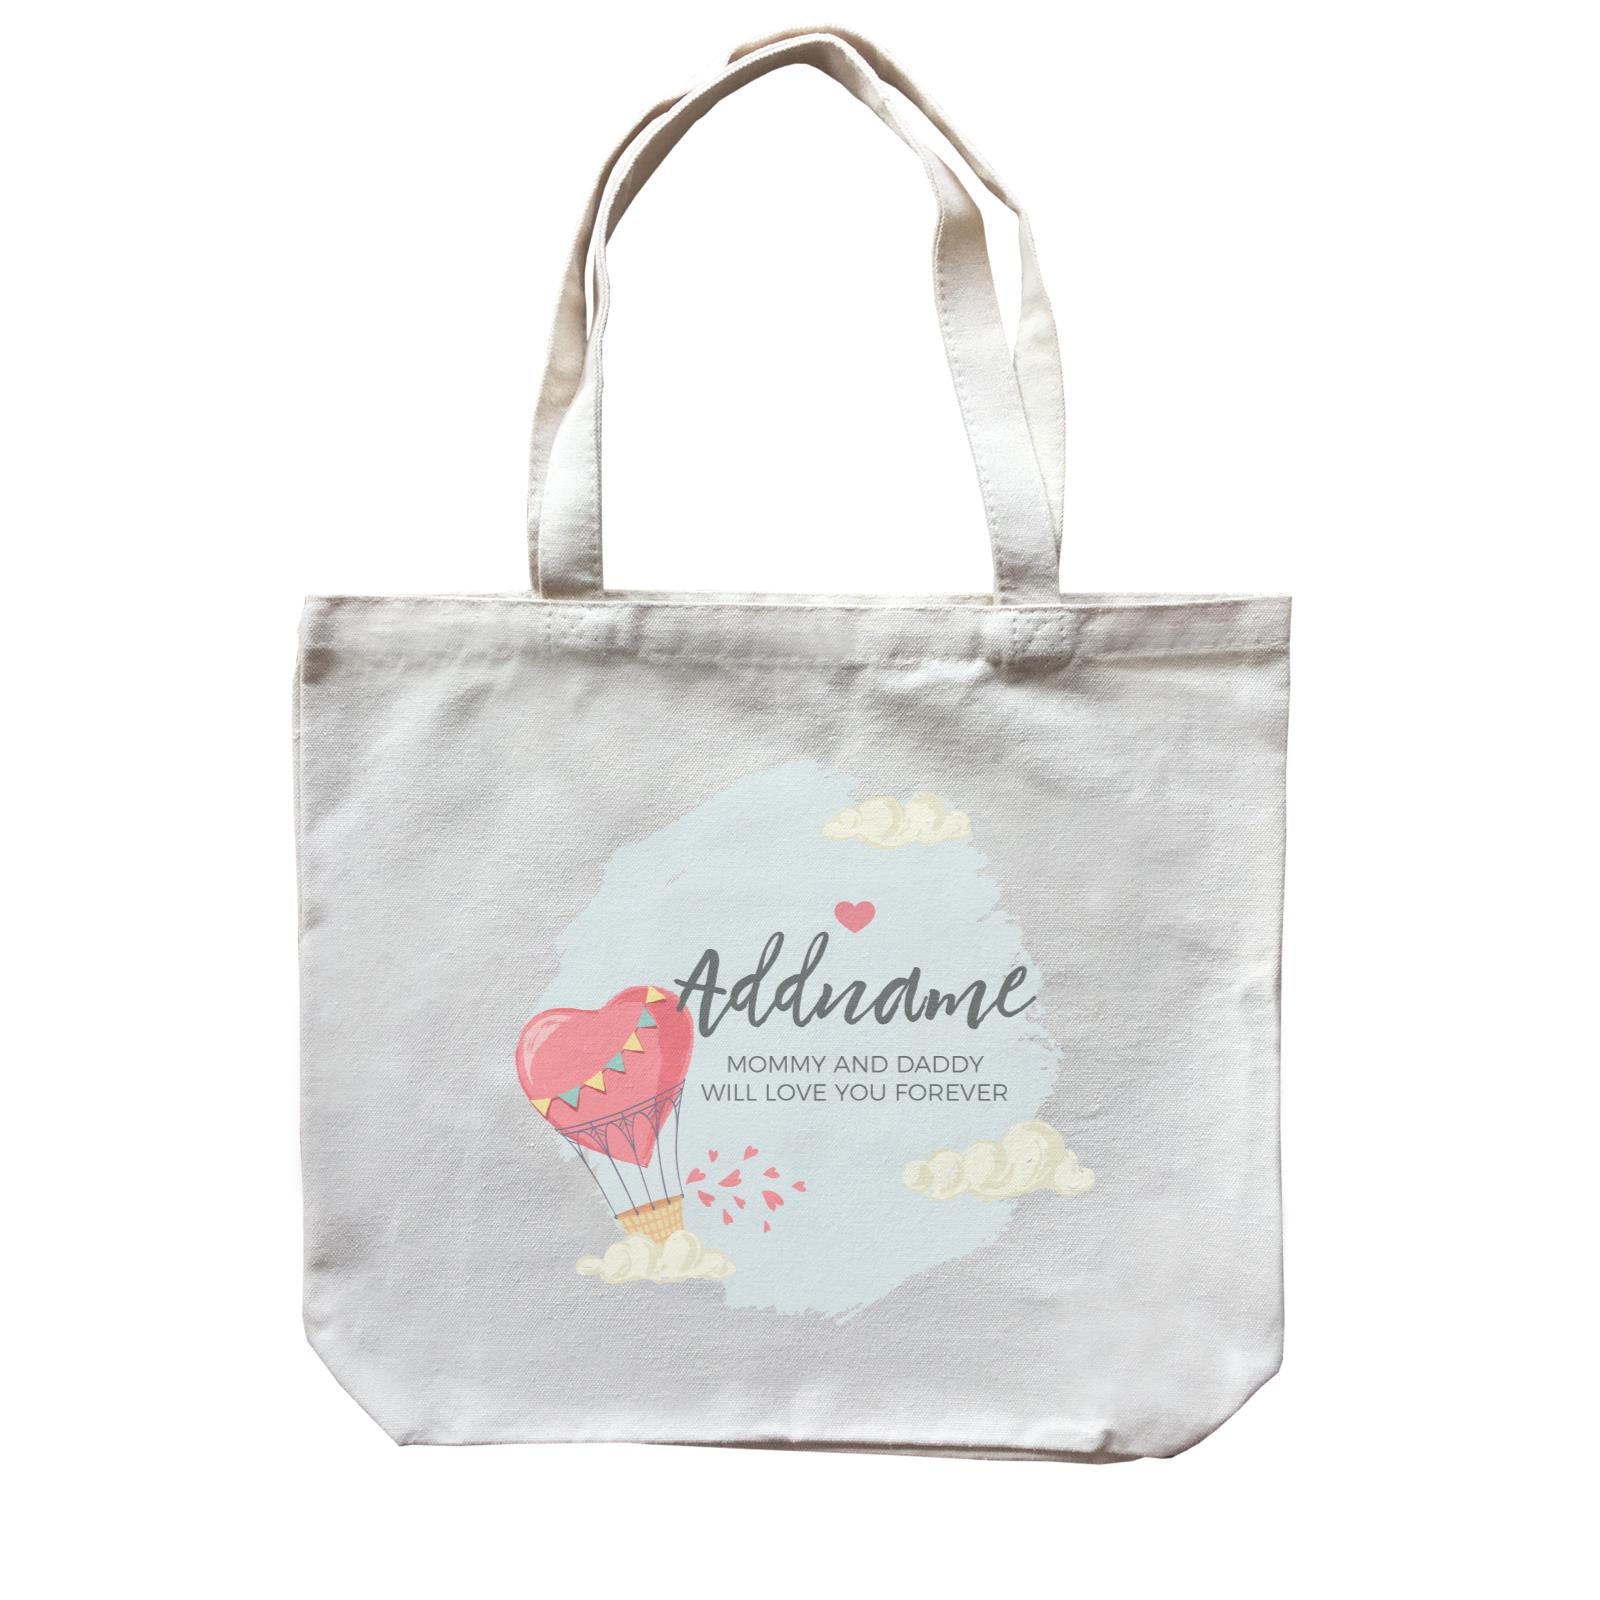 Heart Shaped Hot Air Balloon with Hearts and Clouds Personalizable with Name and Text Canvas Bag